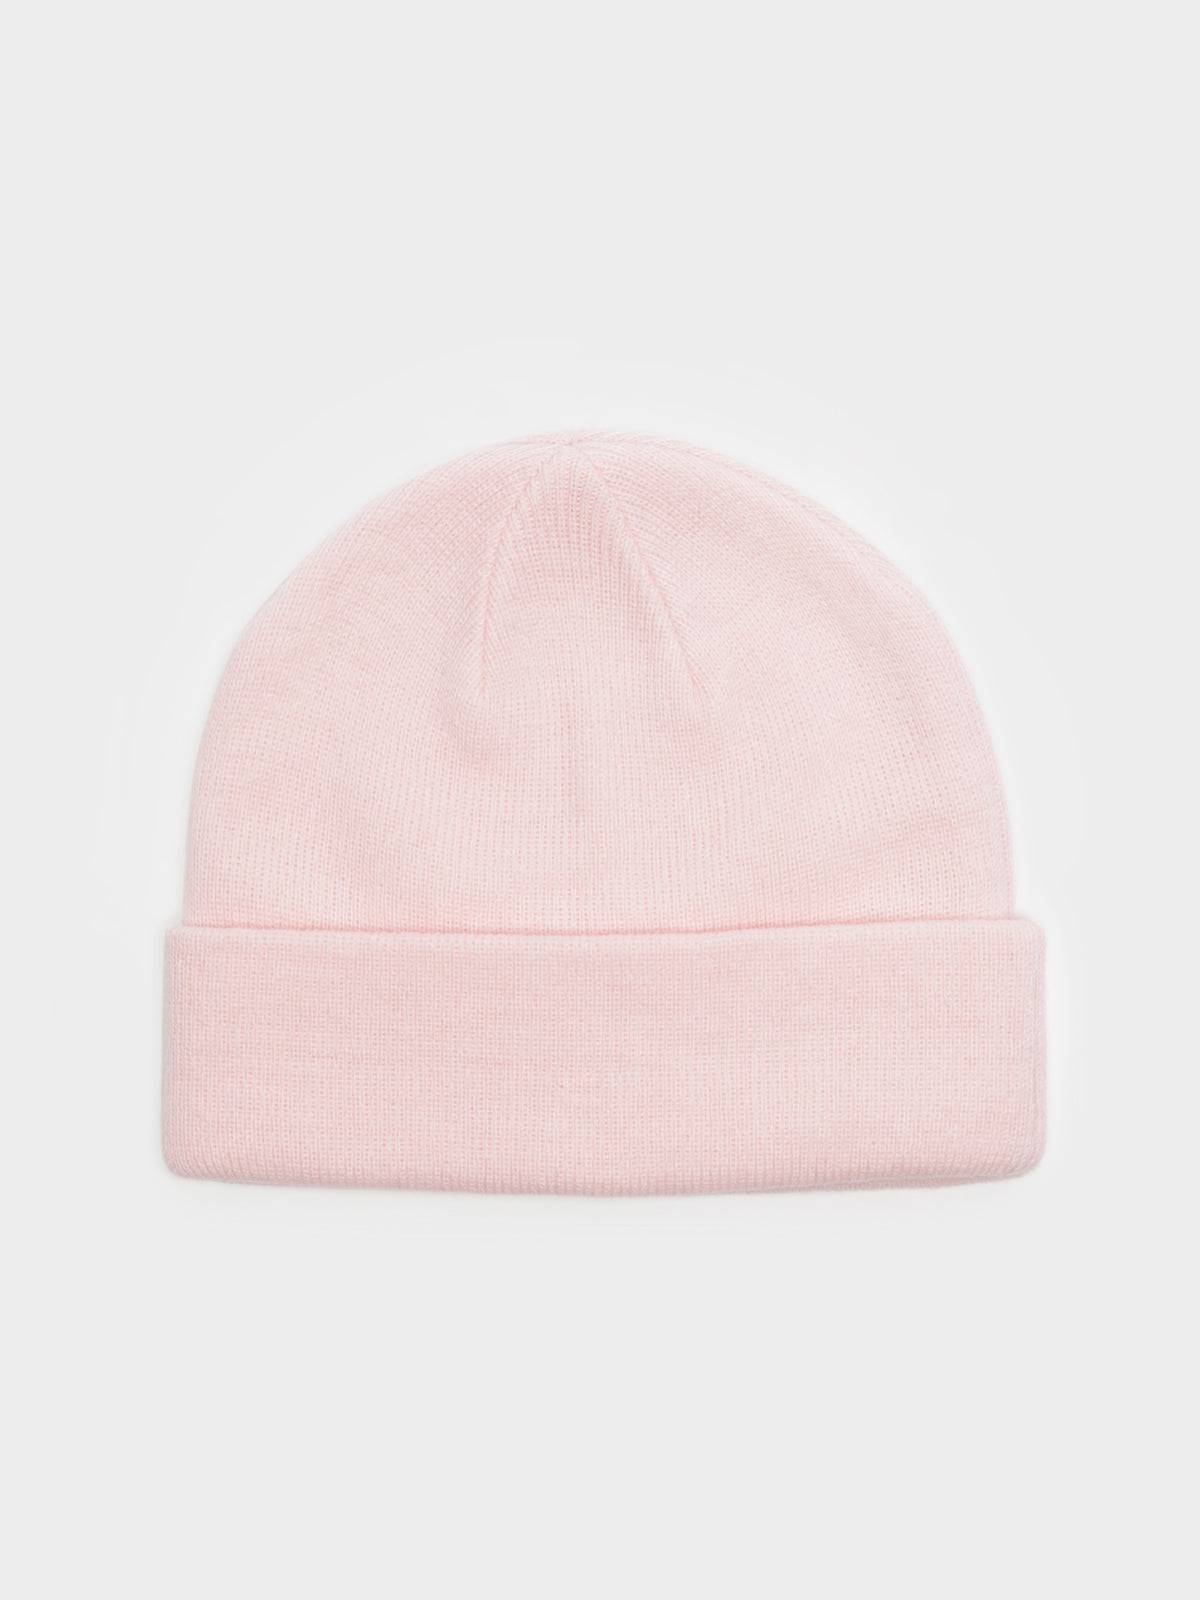 Bunny Basic Beanie in Pink